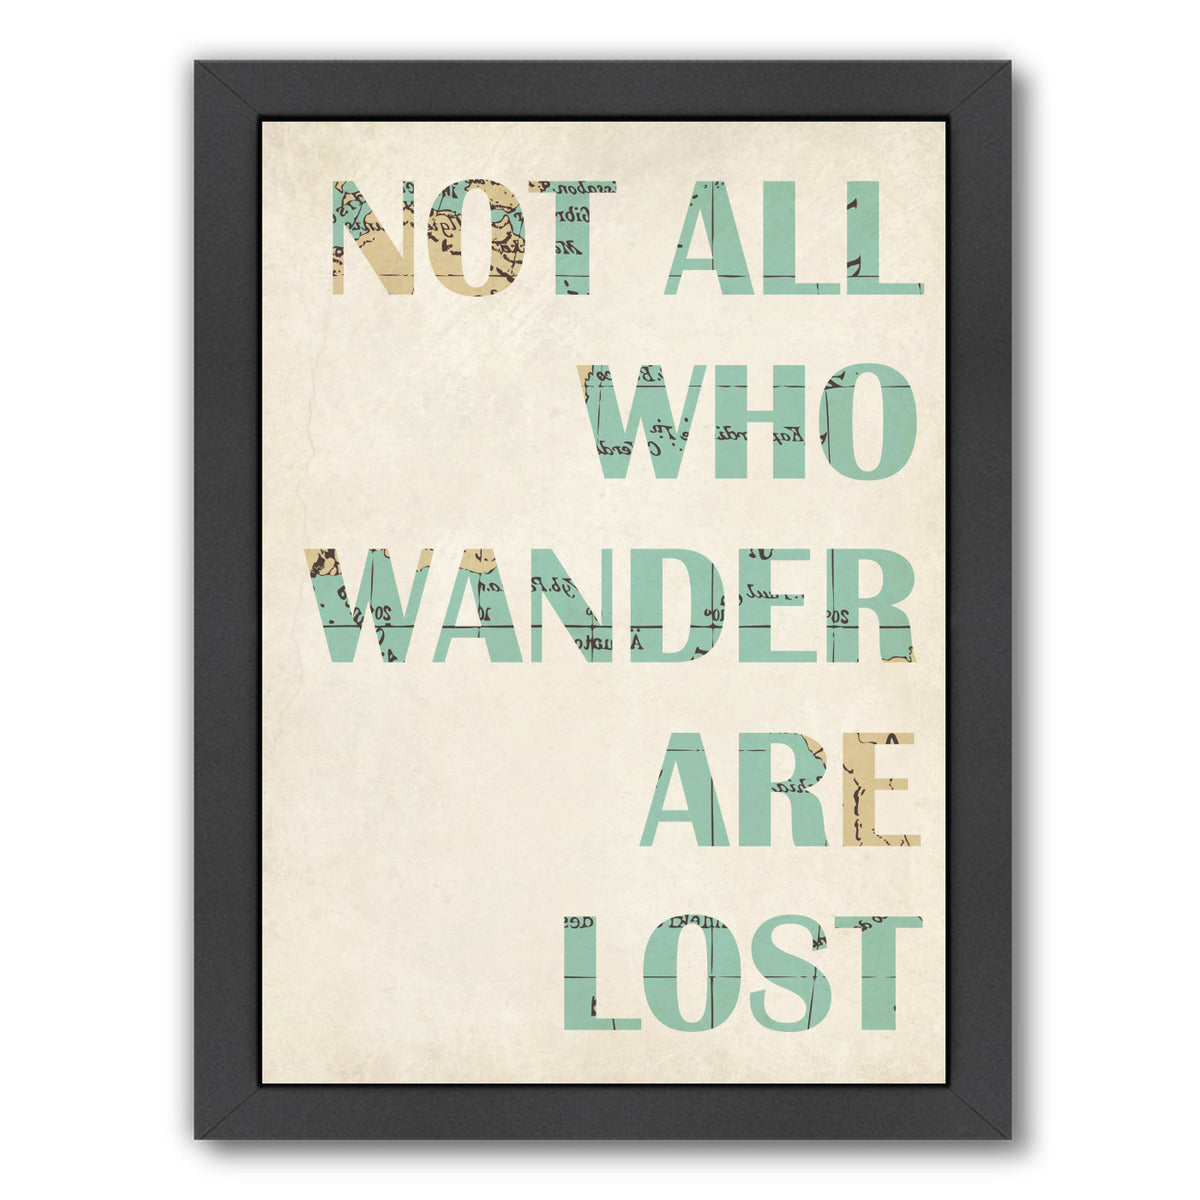 Not All Who Wander Are Lost by Samantha Ranlet Framed Print - Americanflat